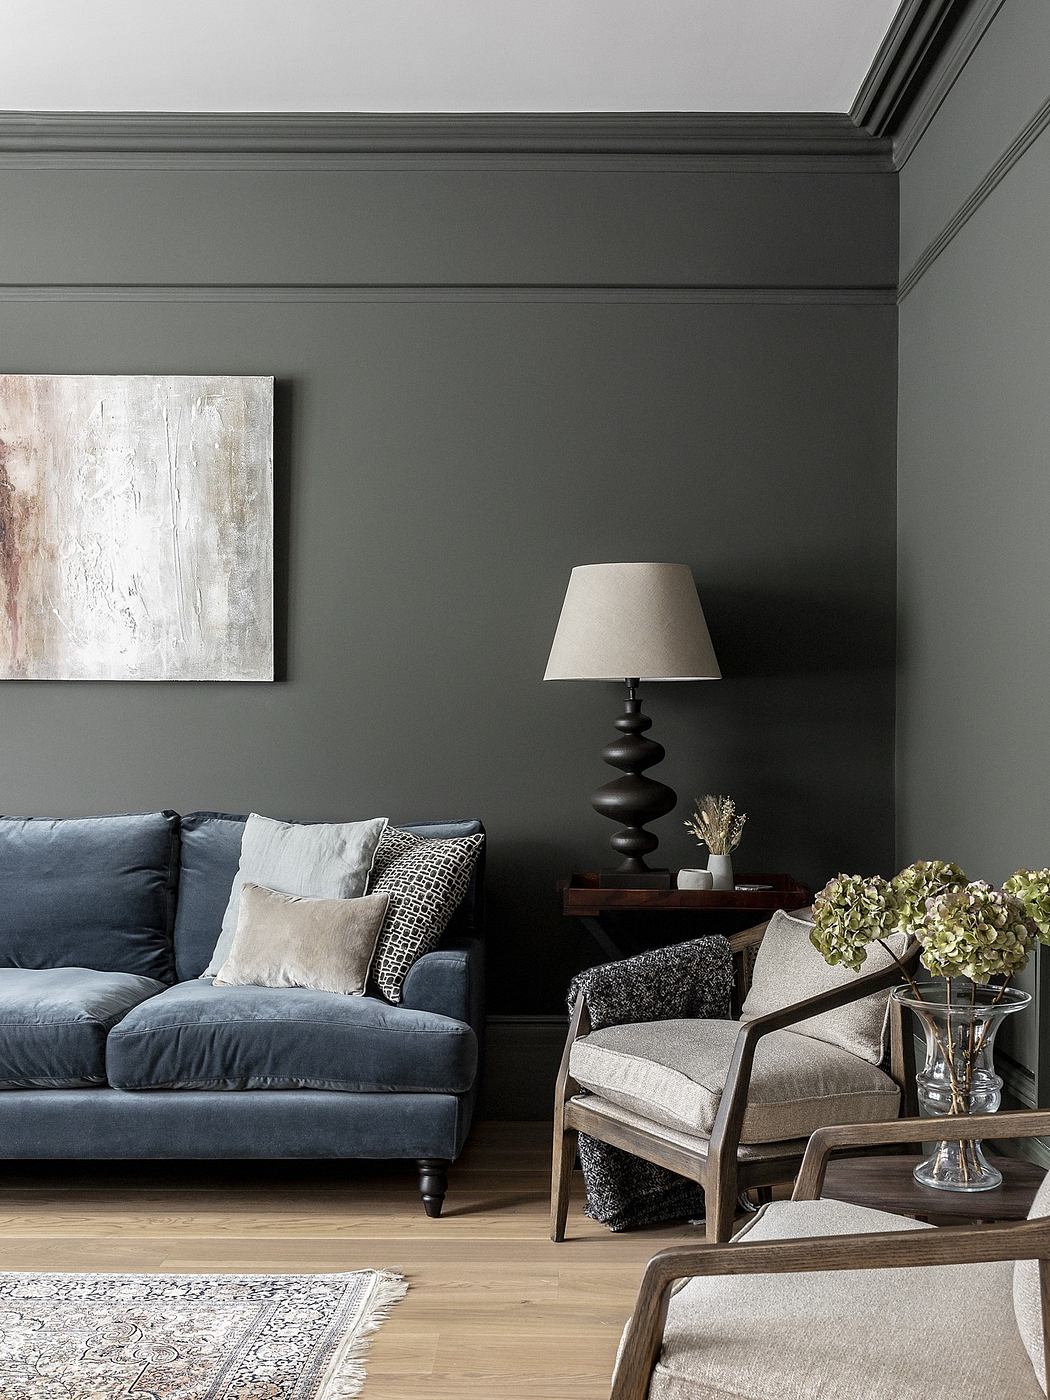 Elegant living room with a navy sofa, wooden furniture, and grey walls.